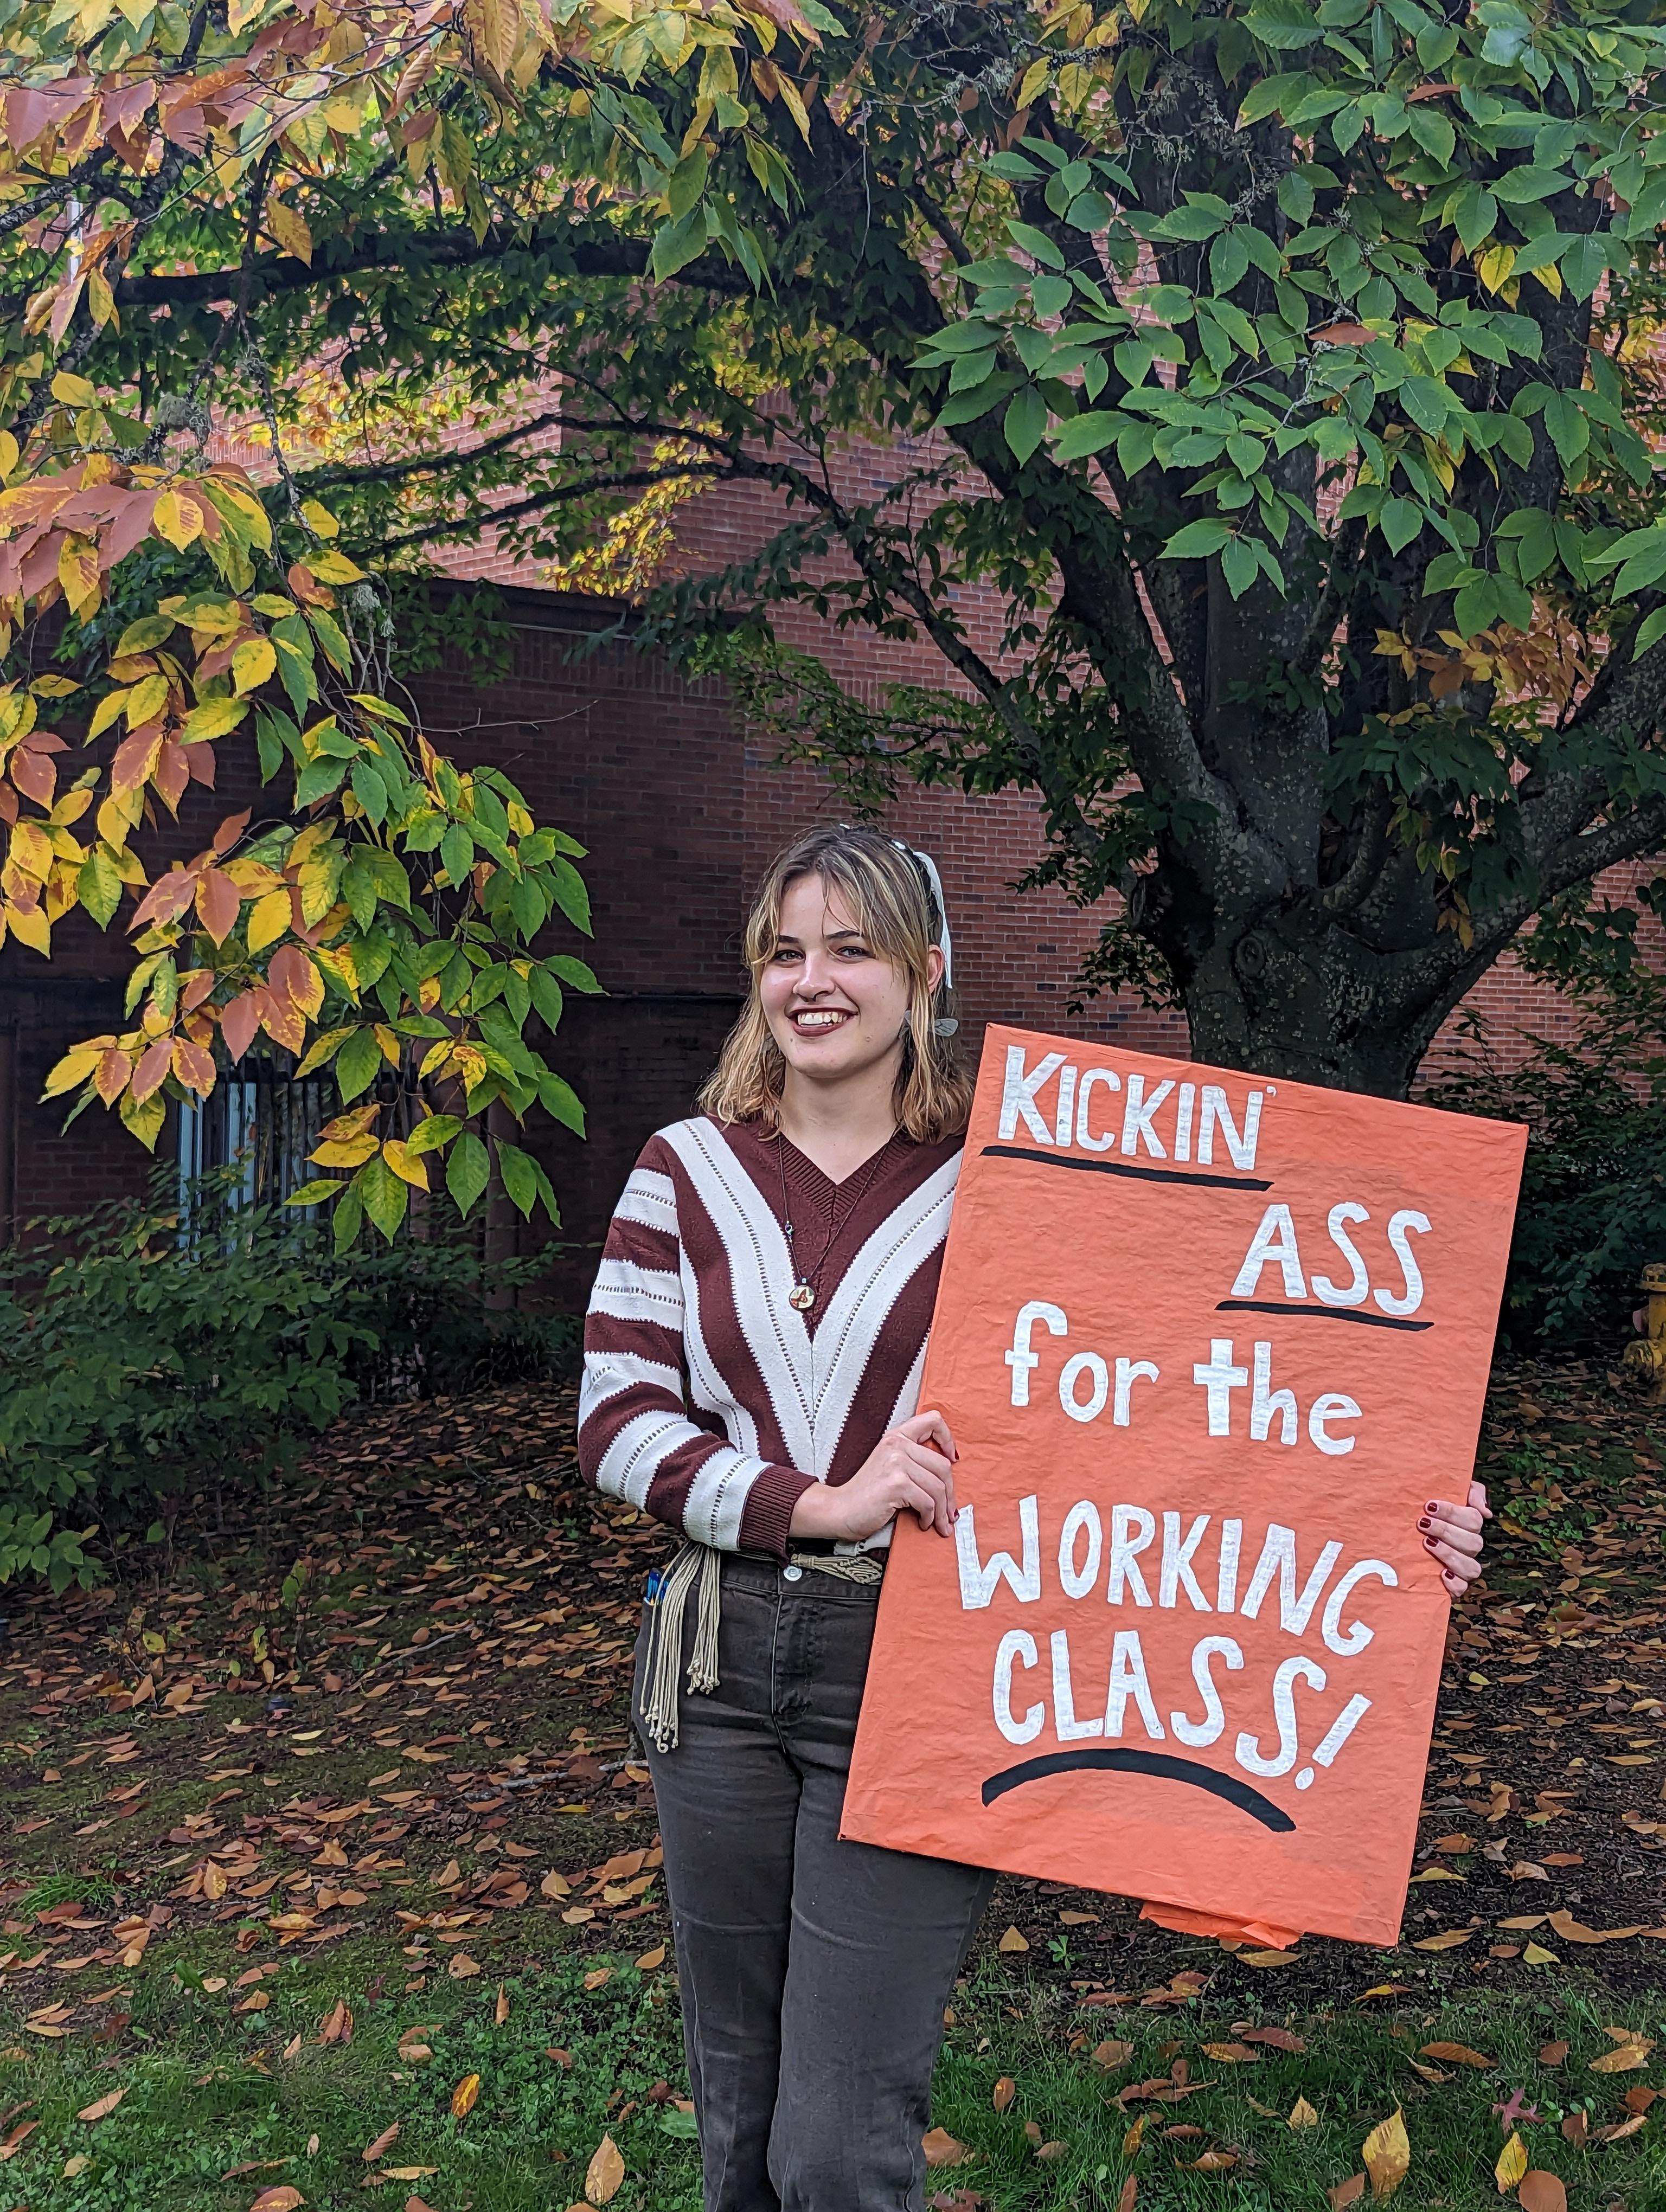 Carolyn Roderique, UOSW organizer and Resident Assistant holds a sign &ldquo;kickin ass for the working class!&rdquo;